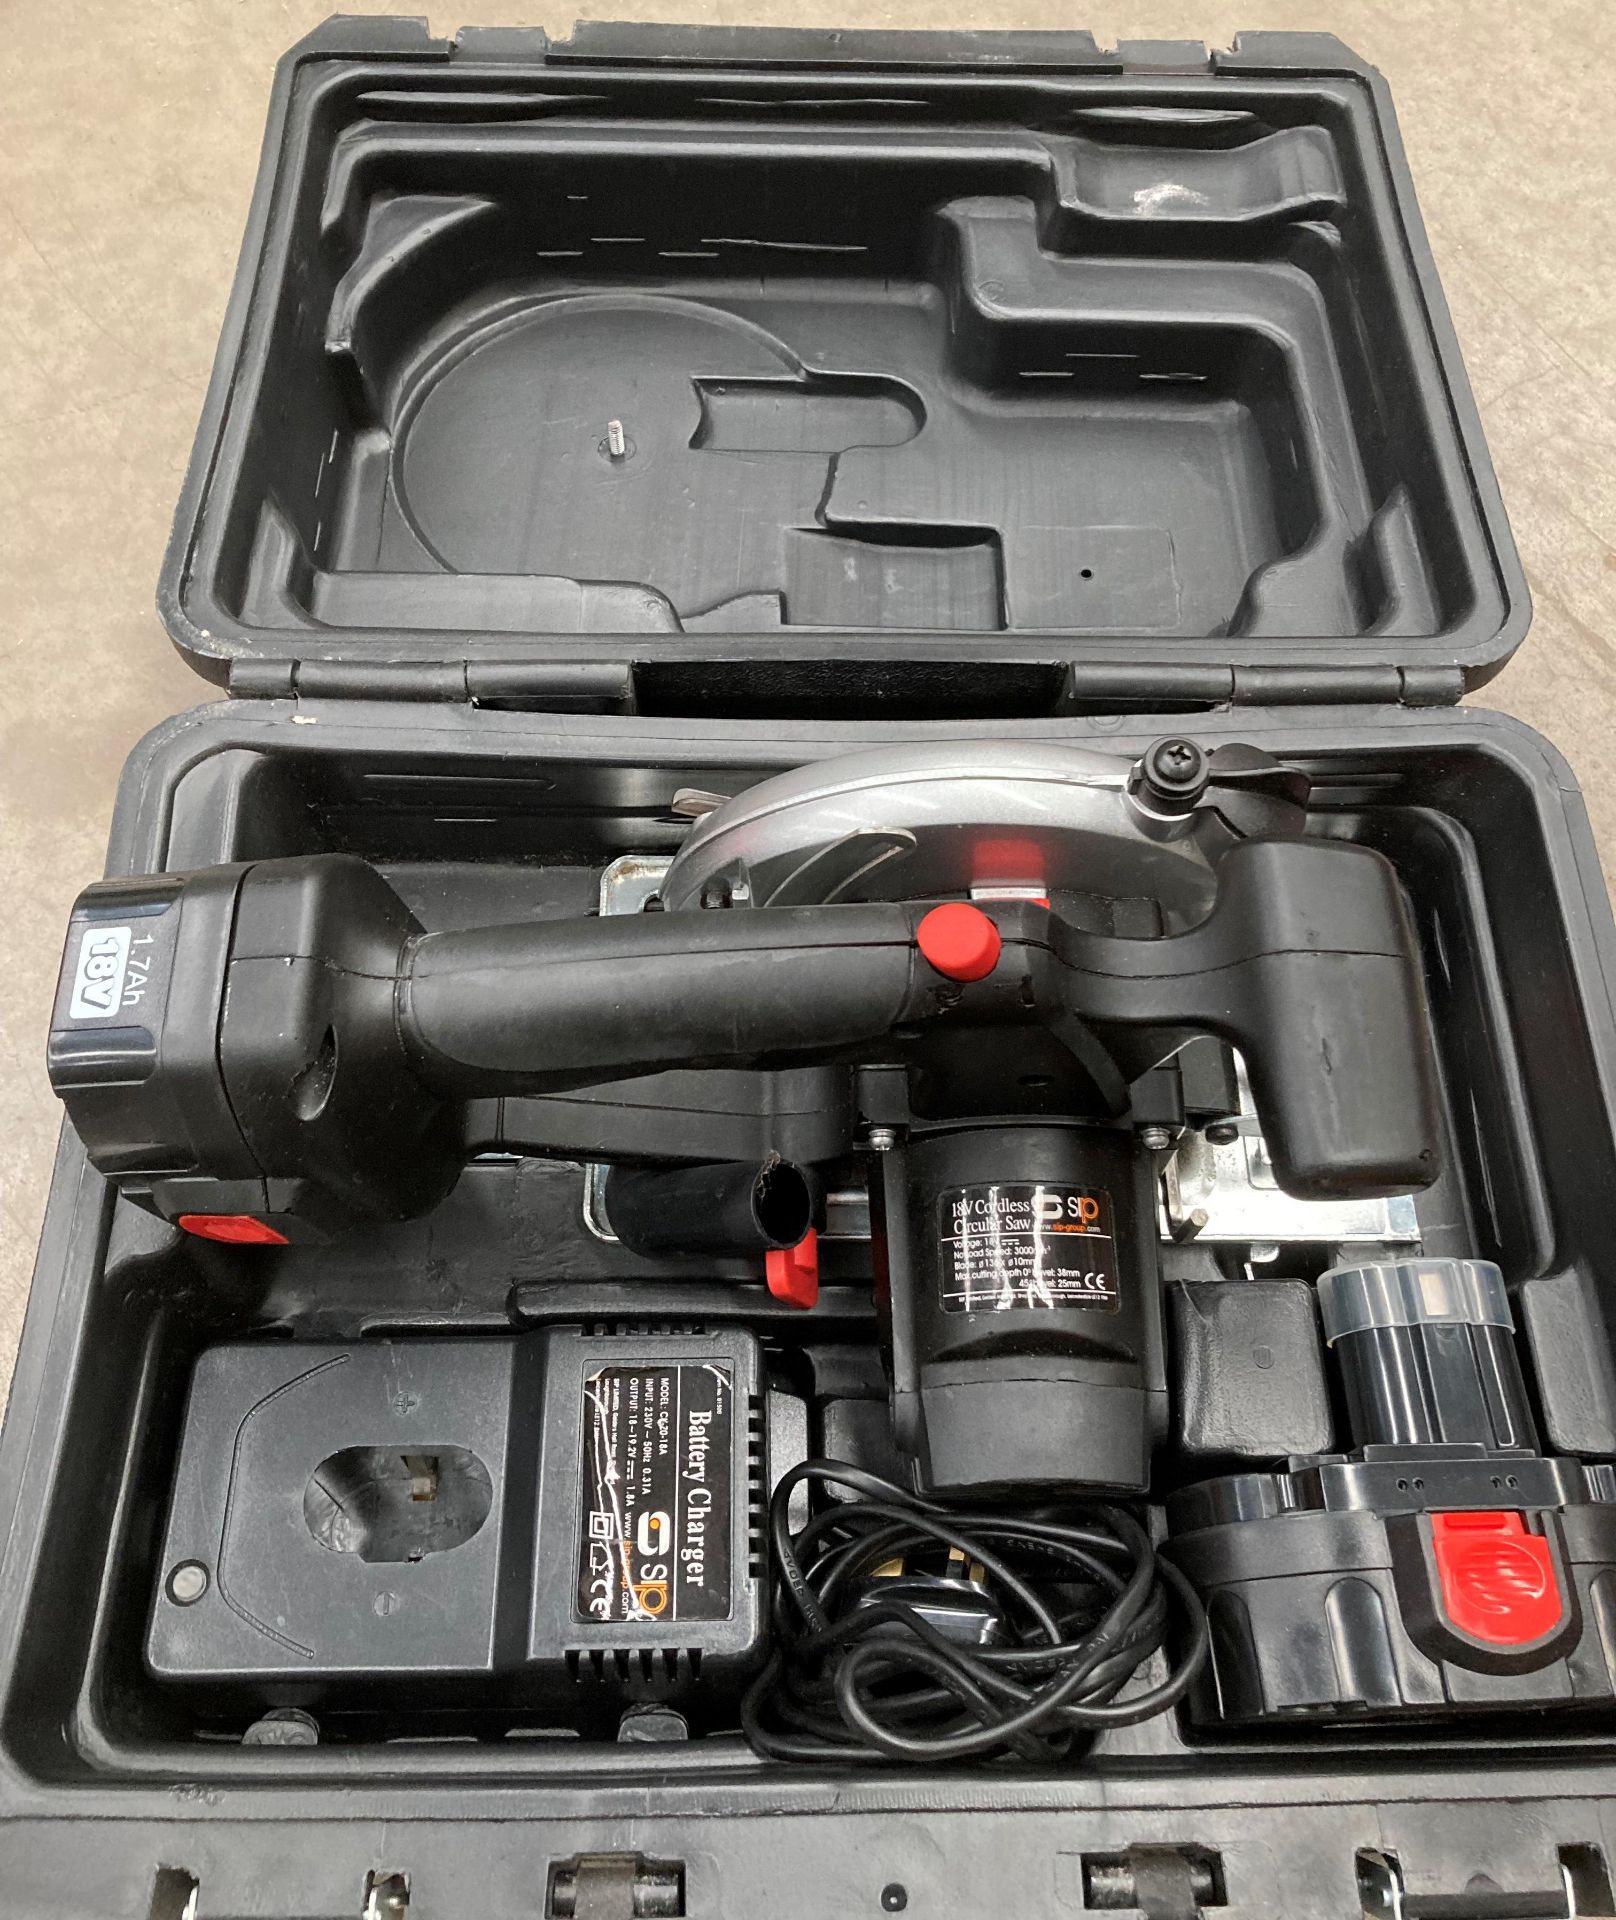 An SP 18v cordless circular saw with two batteries and charger in case.